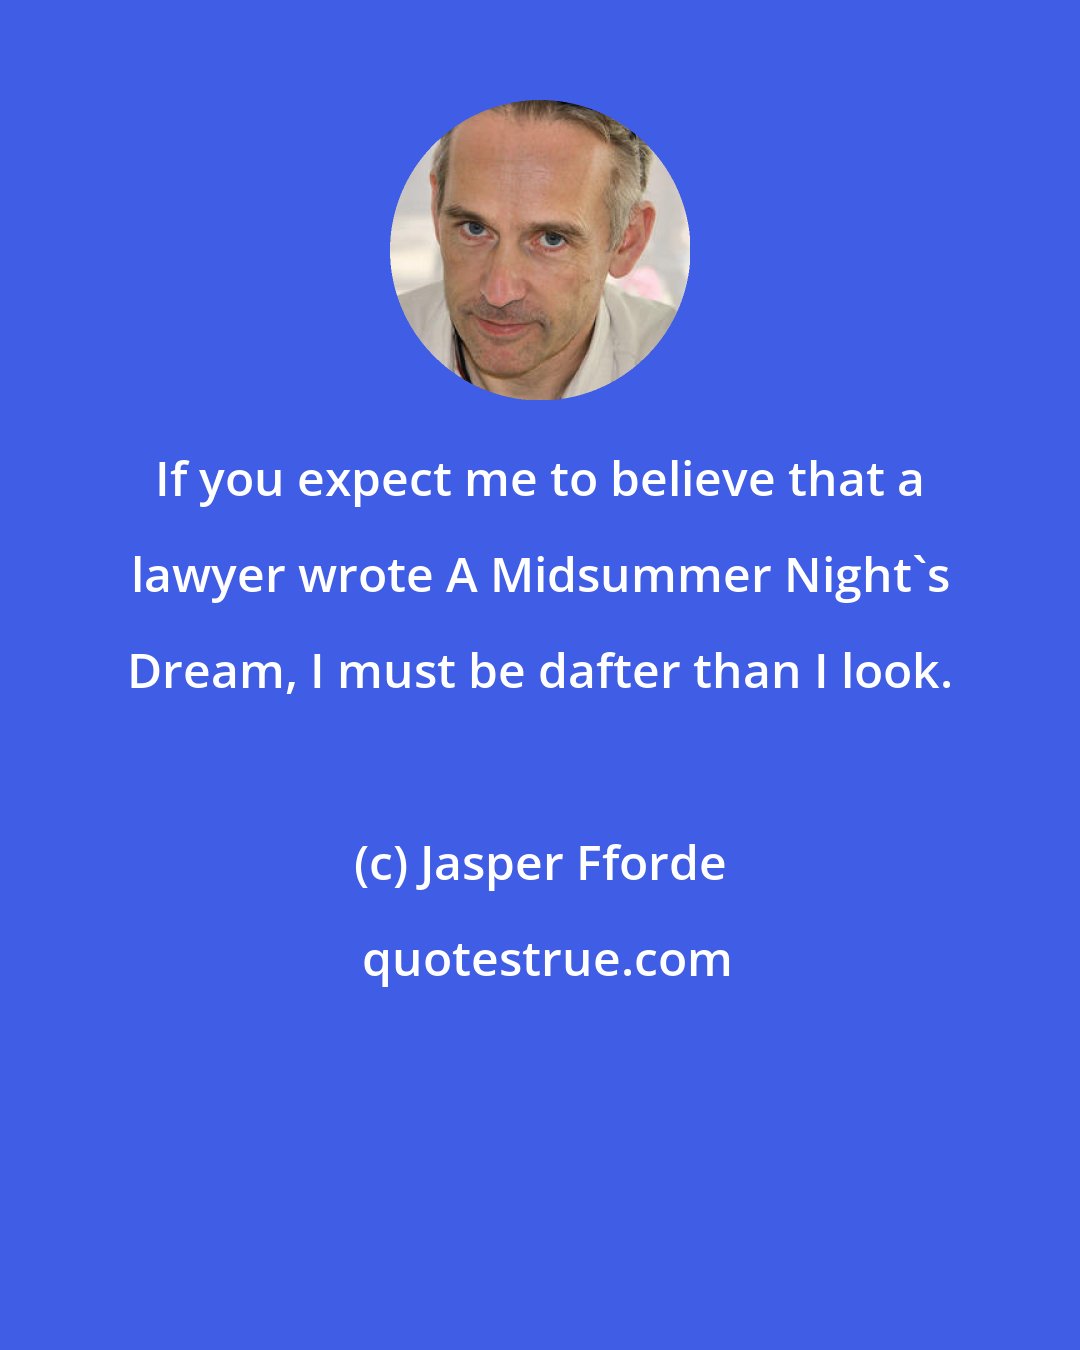 Jasper Fforde: If you expect me to believe that a lawyer wrote A Midsummer Night's Dream, I must be dafter than I look.